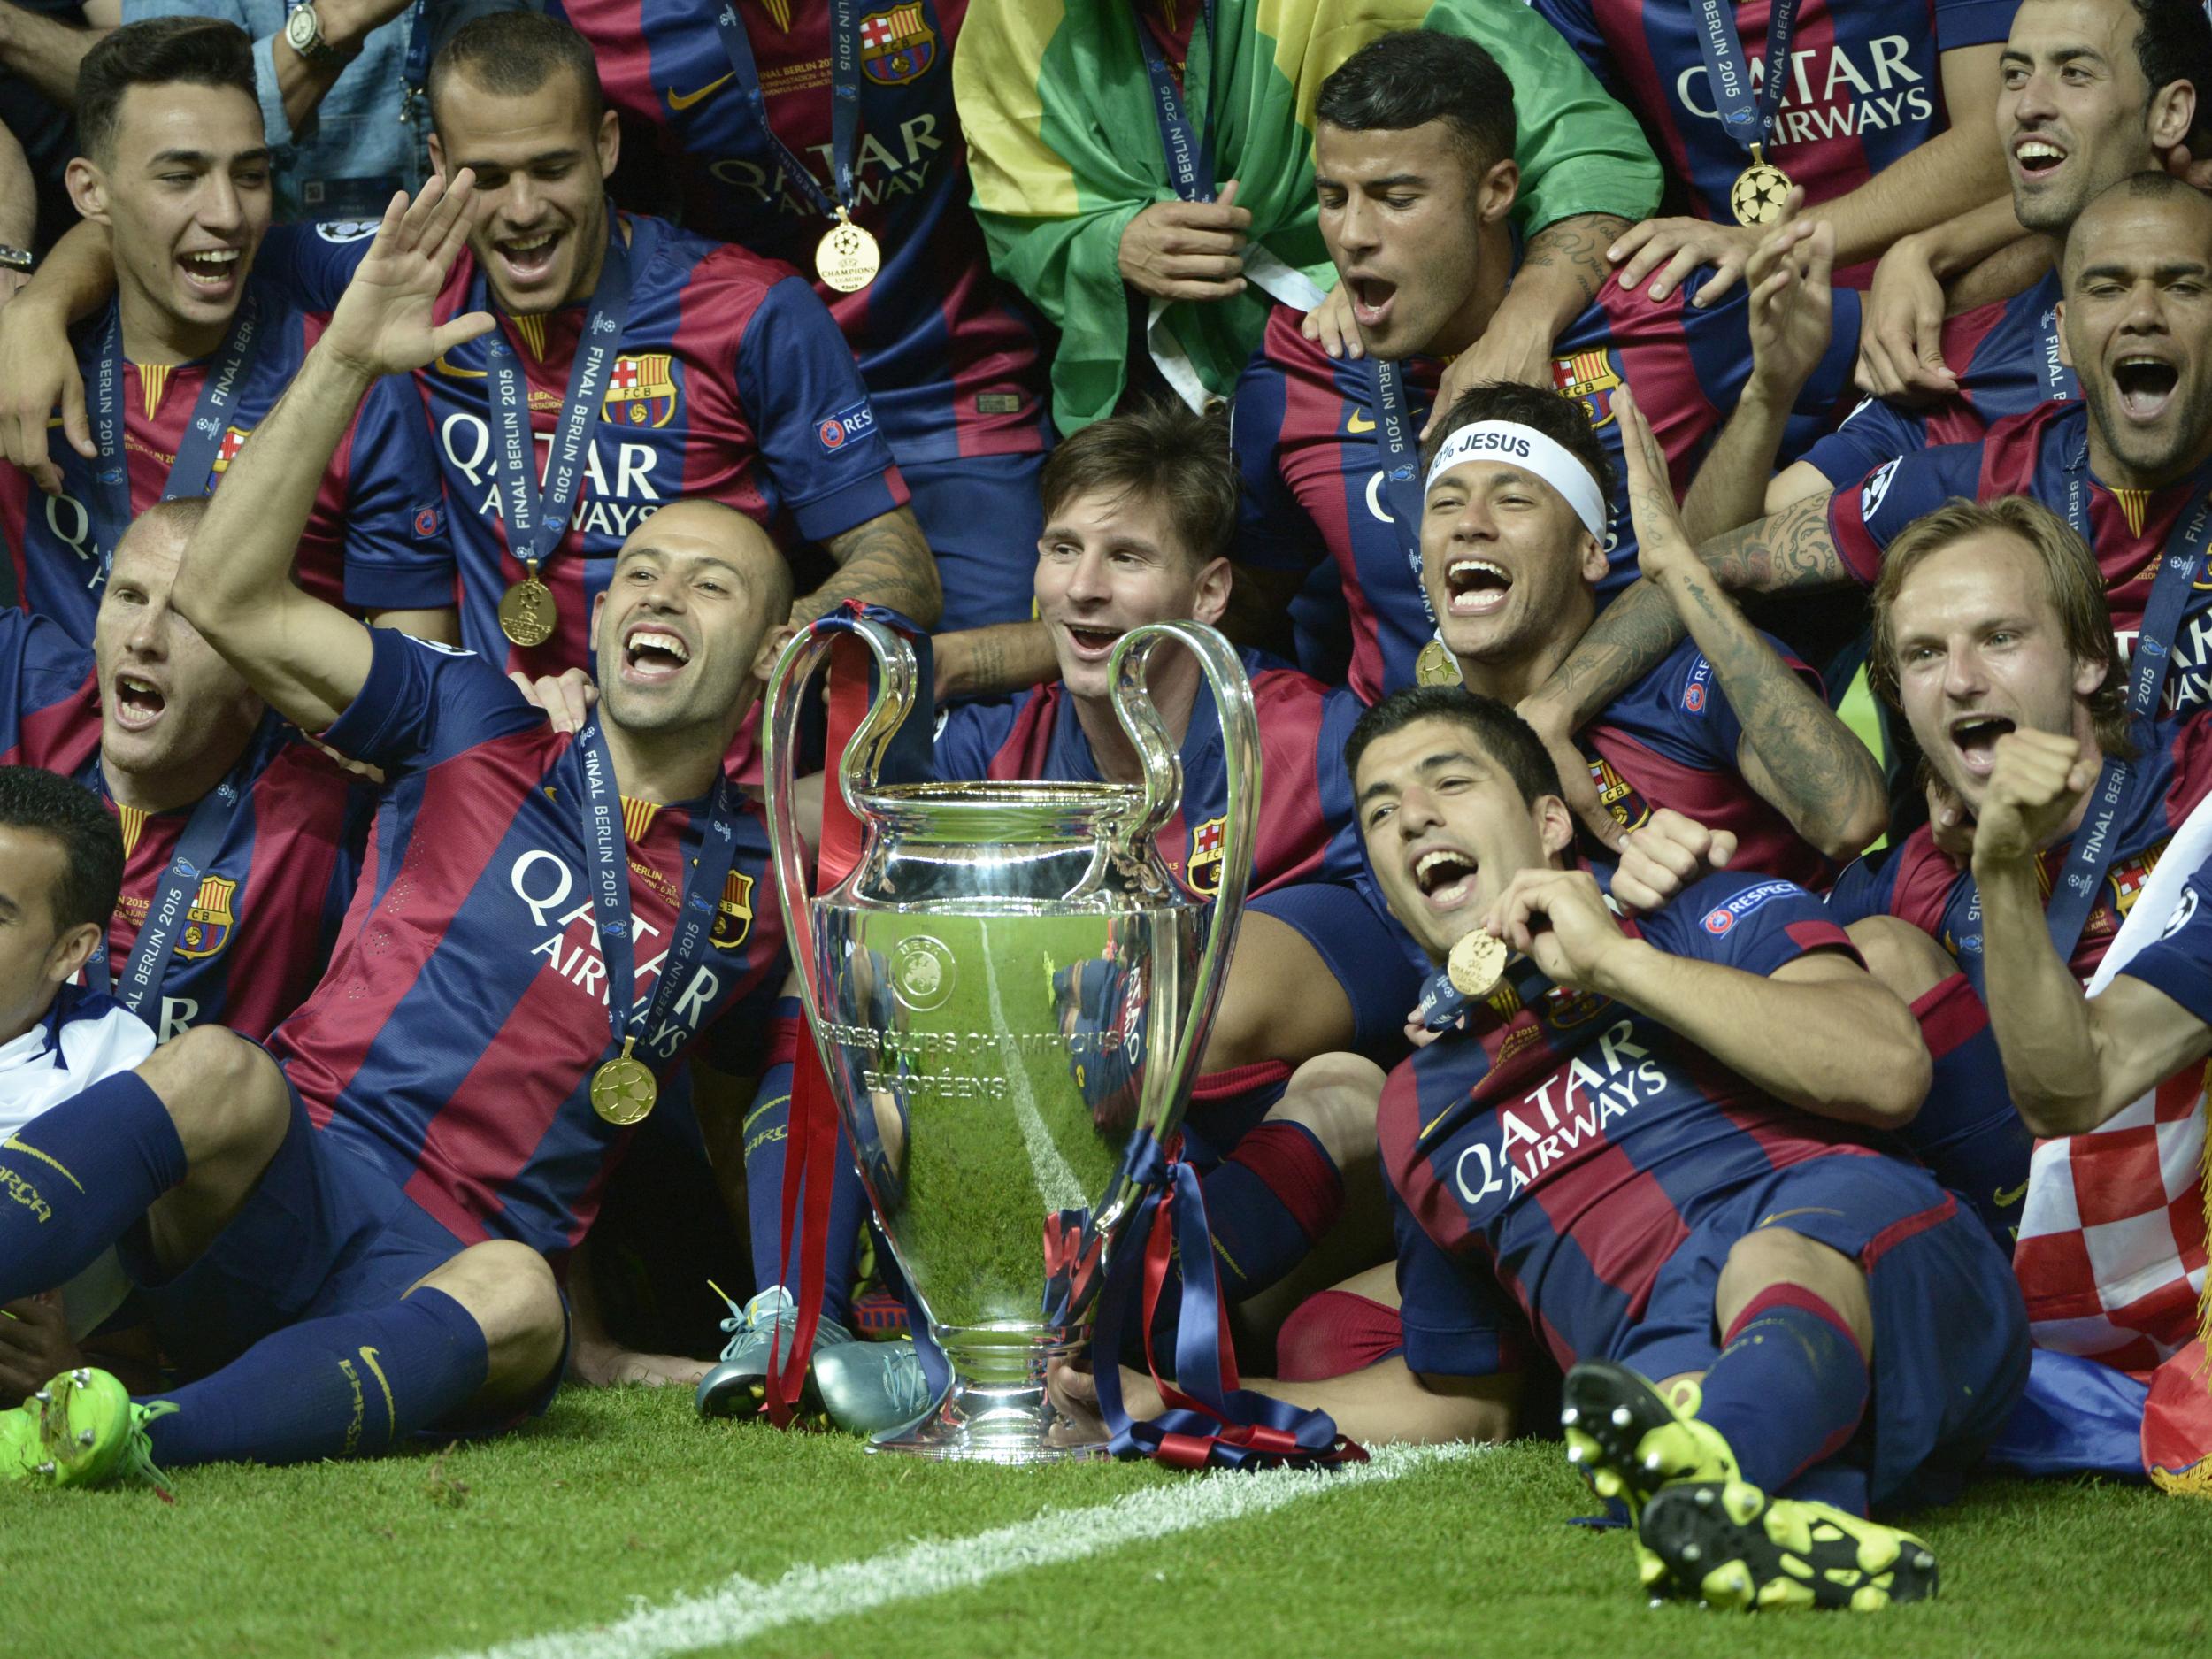 Barcelona players including Lionel Messi and Luis Suarez celebrate winning the Champions League in 2015